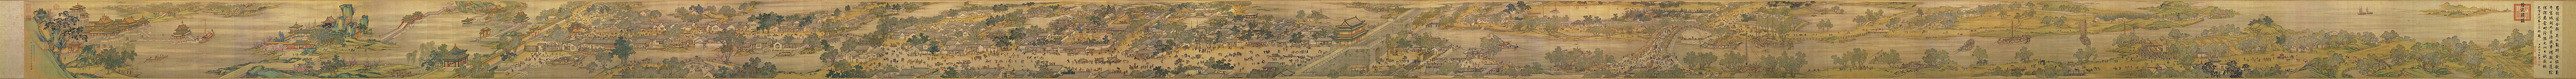 Panorama of Along the River During Qingming Festival, 18th century remake of a 12th century original by Chinese artist Zhang Zeduan; 50% resolution. Note: scroll starts from the right.